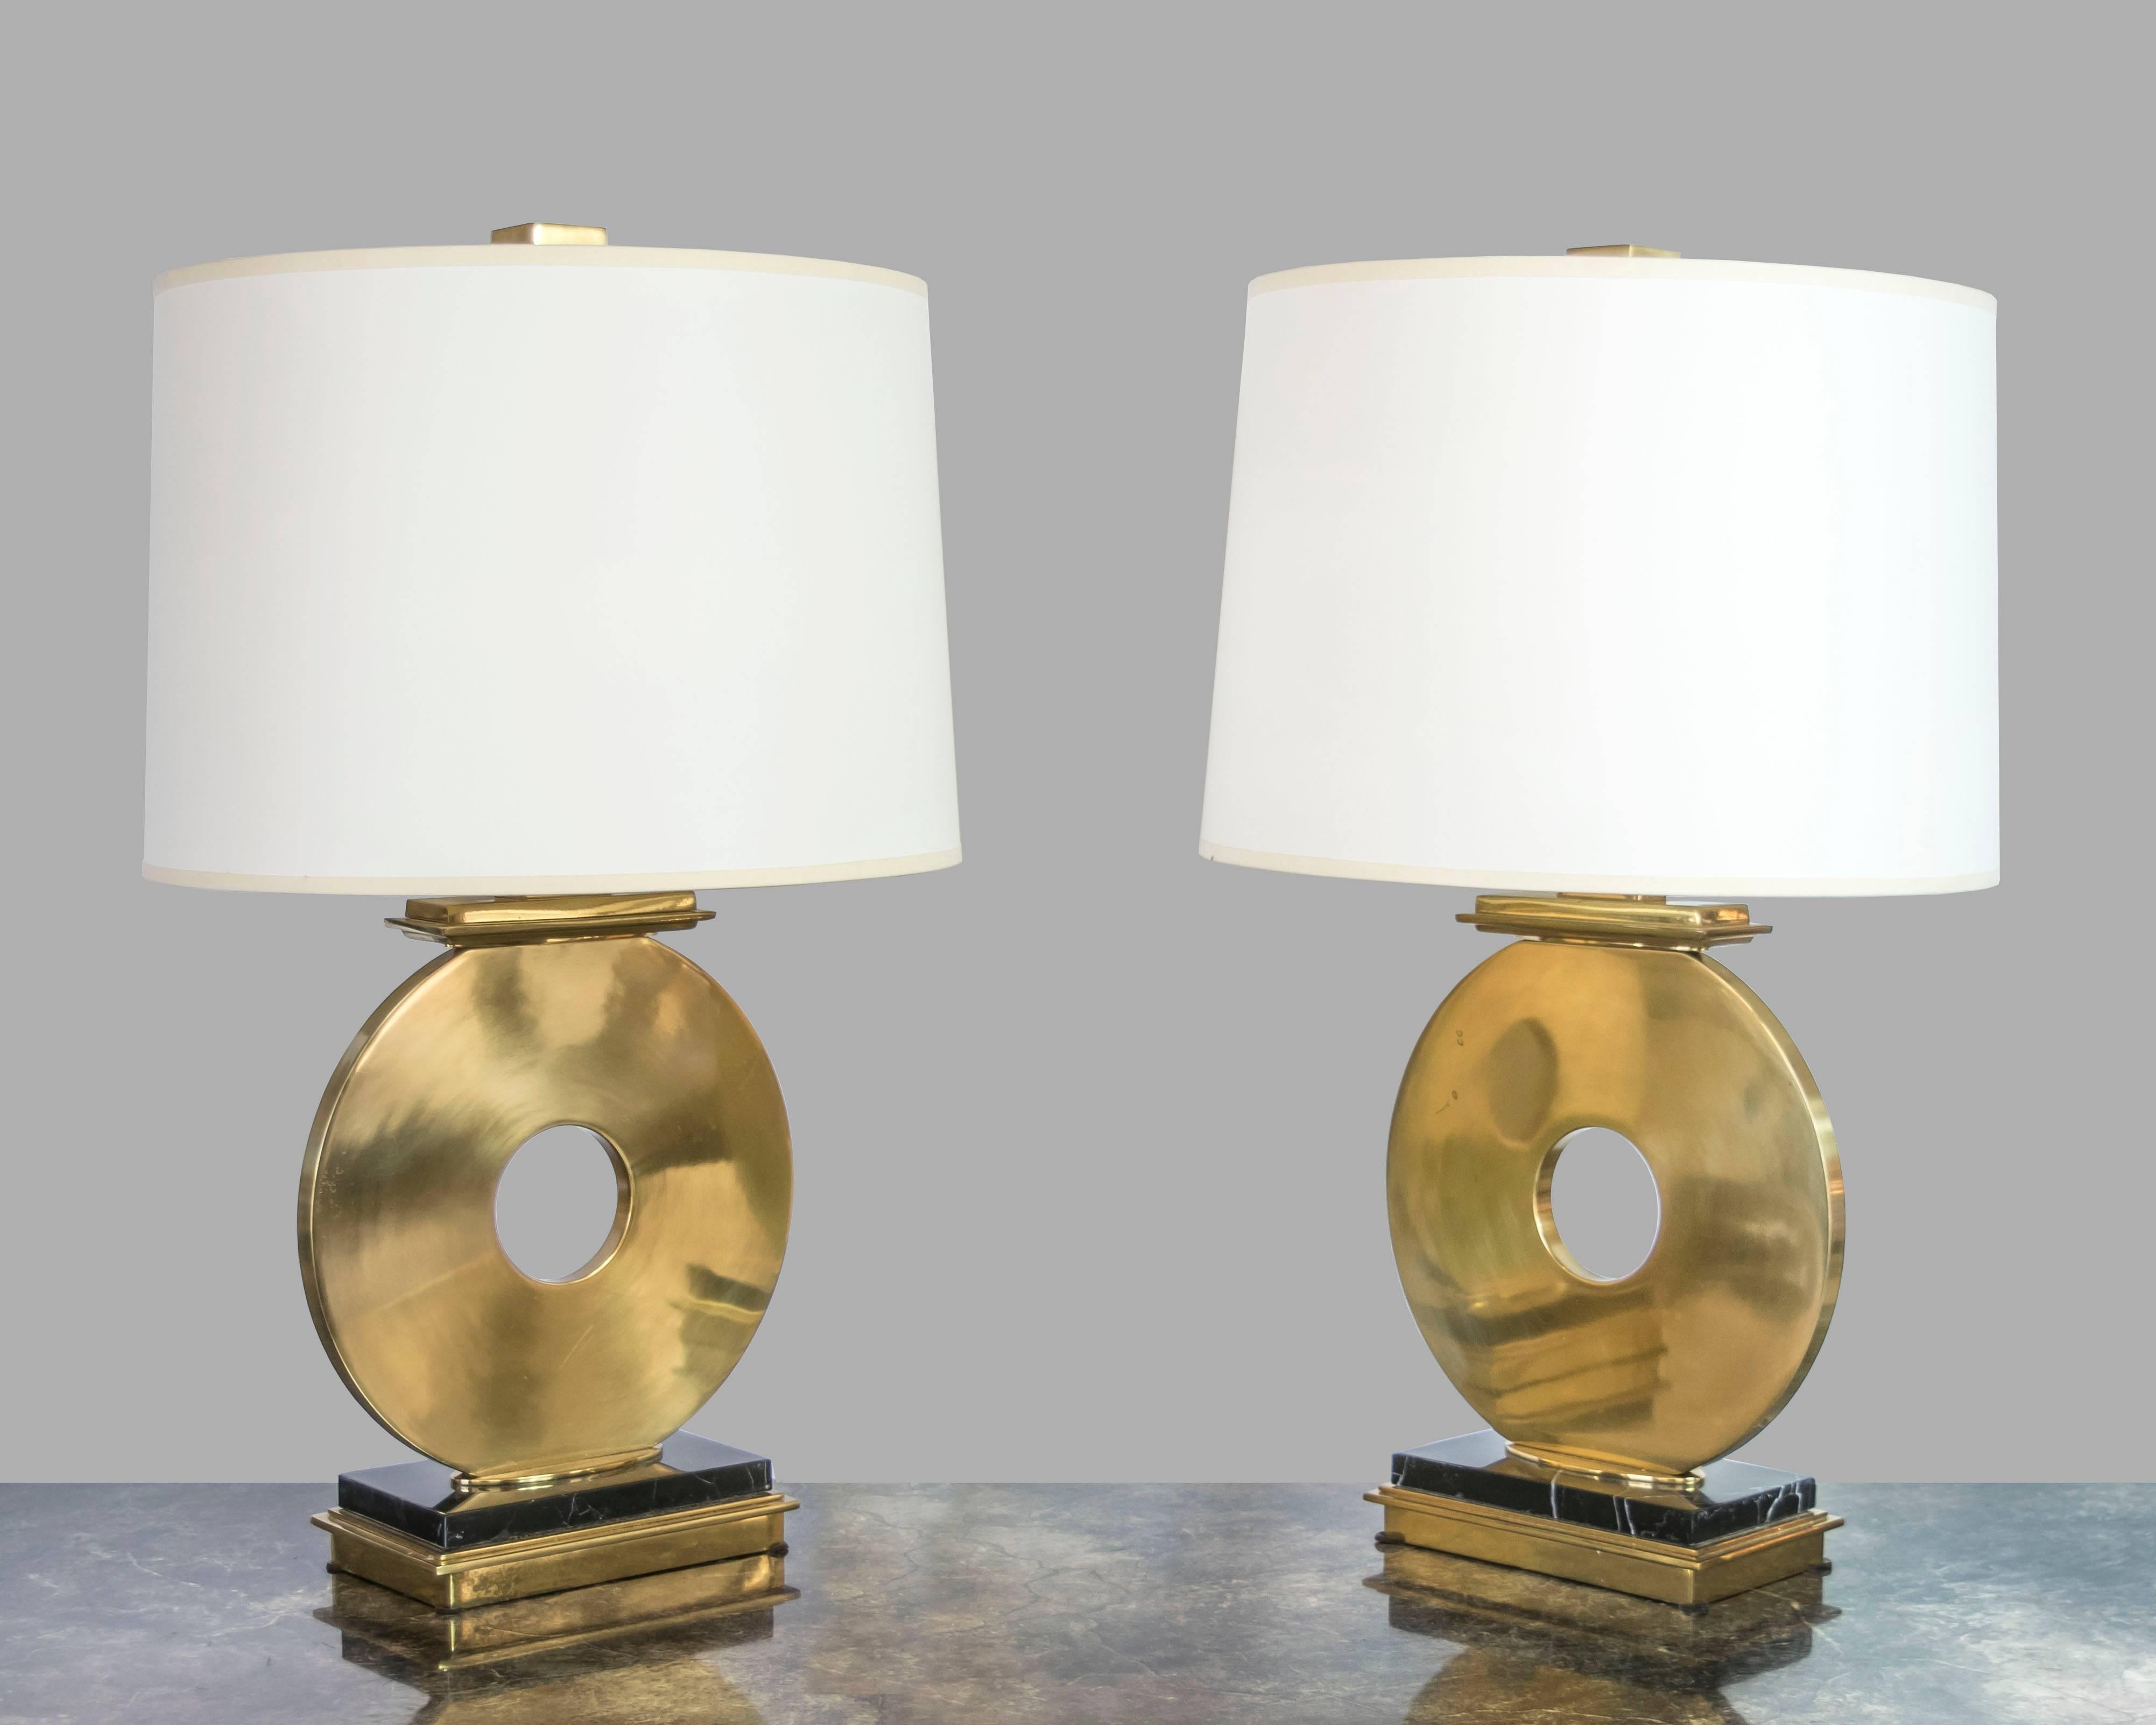 This is a really cool pair of 1970s table lamps with thick brass circular 